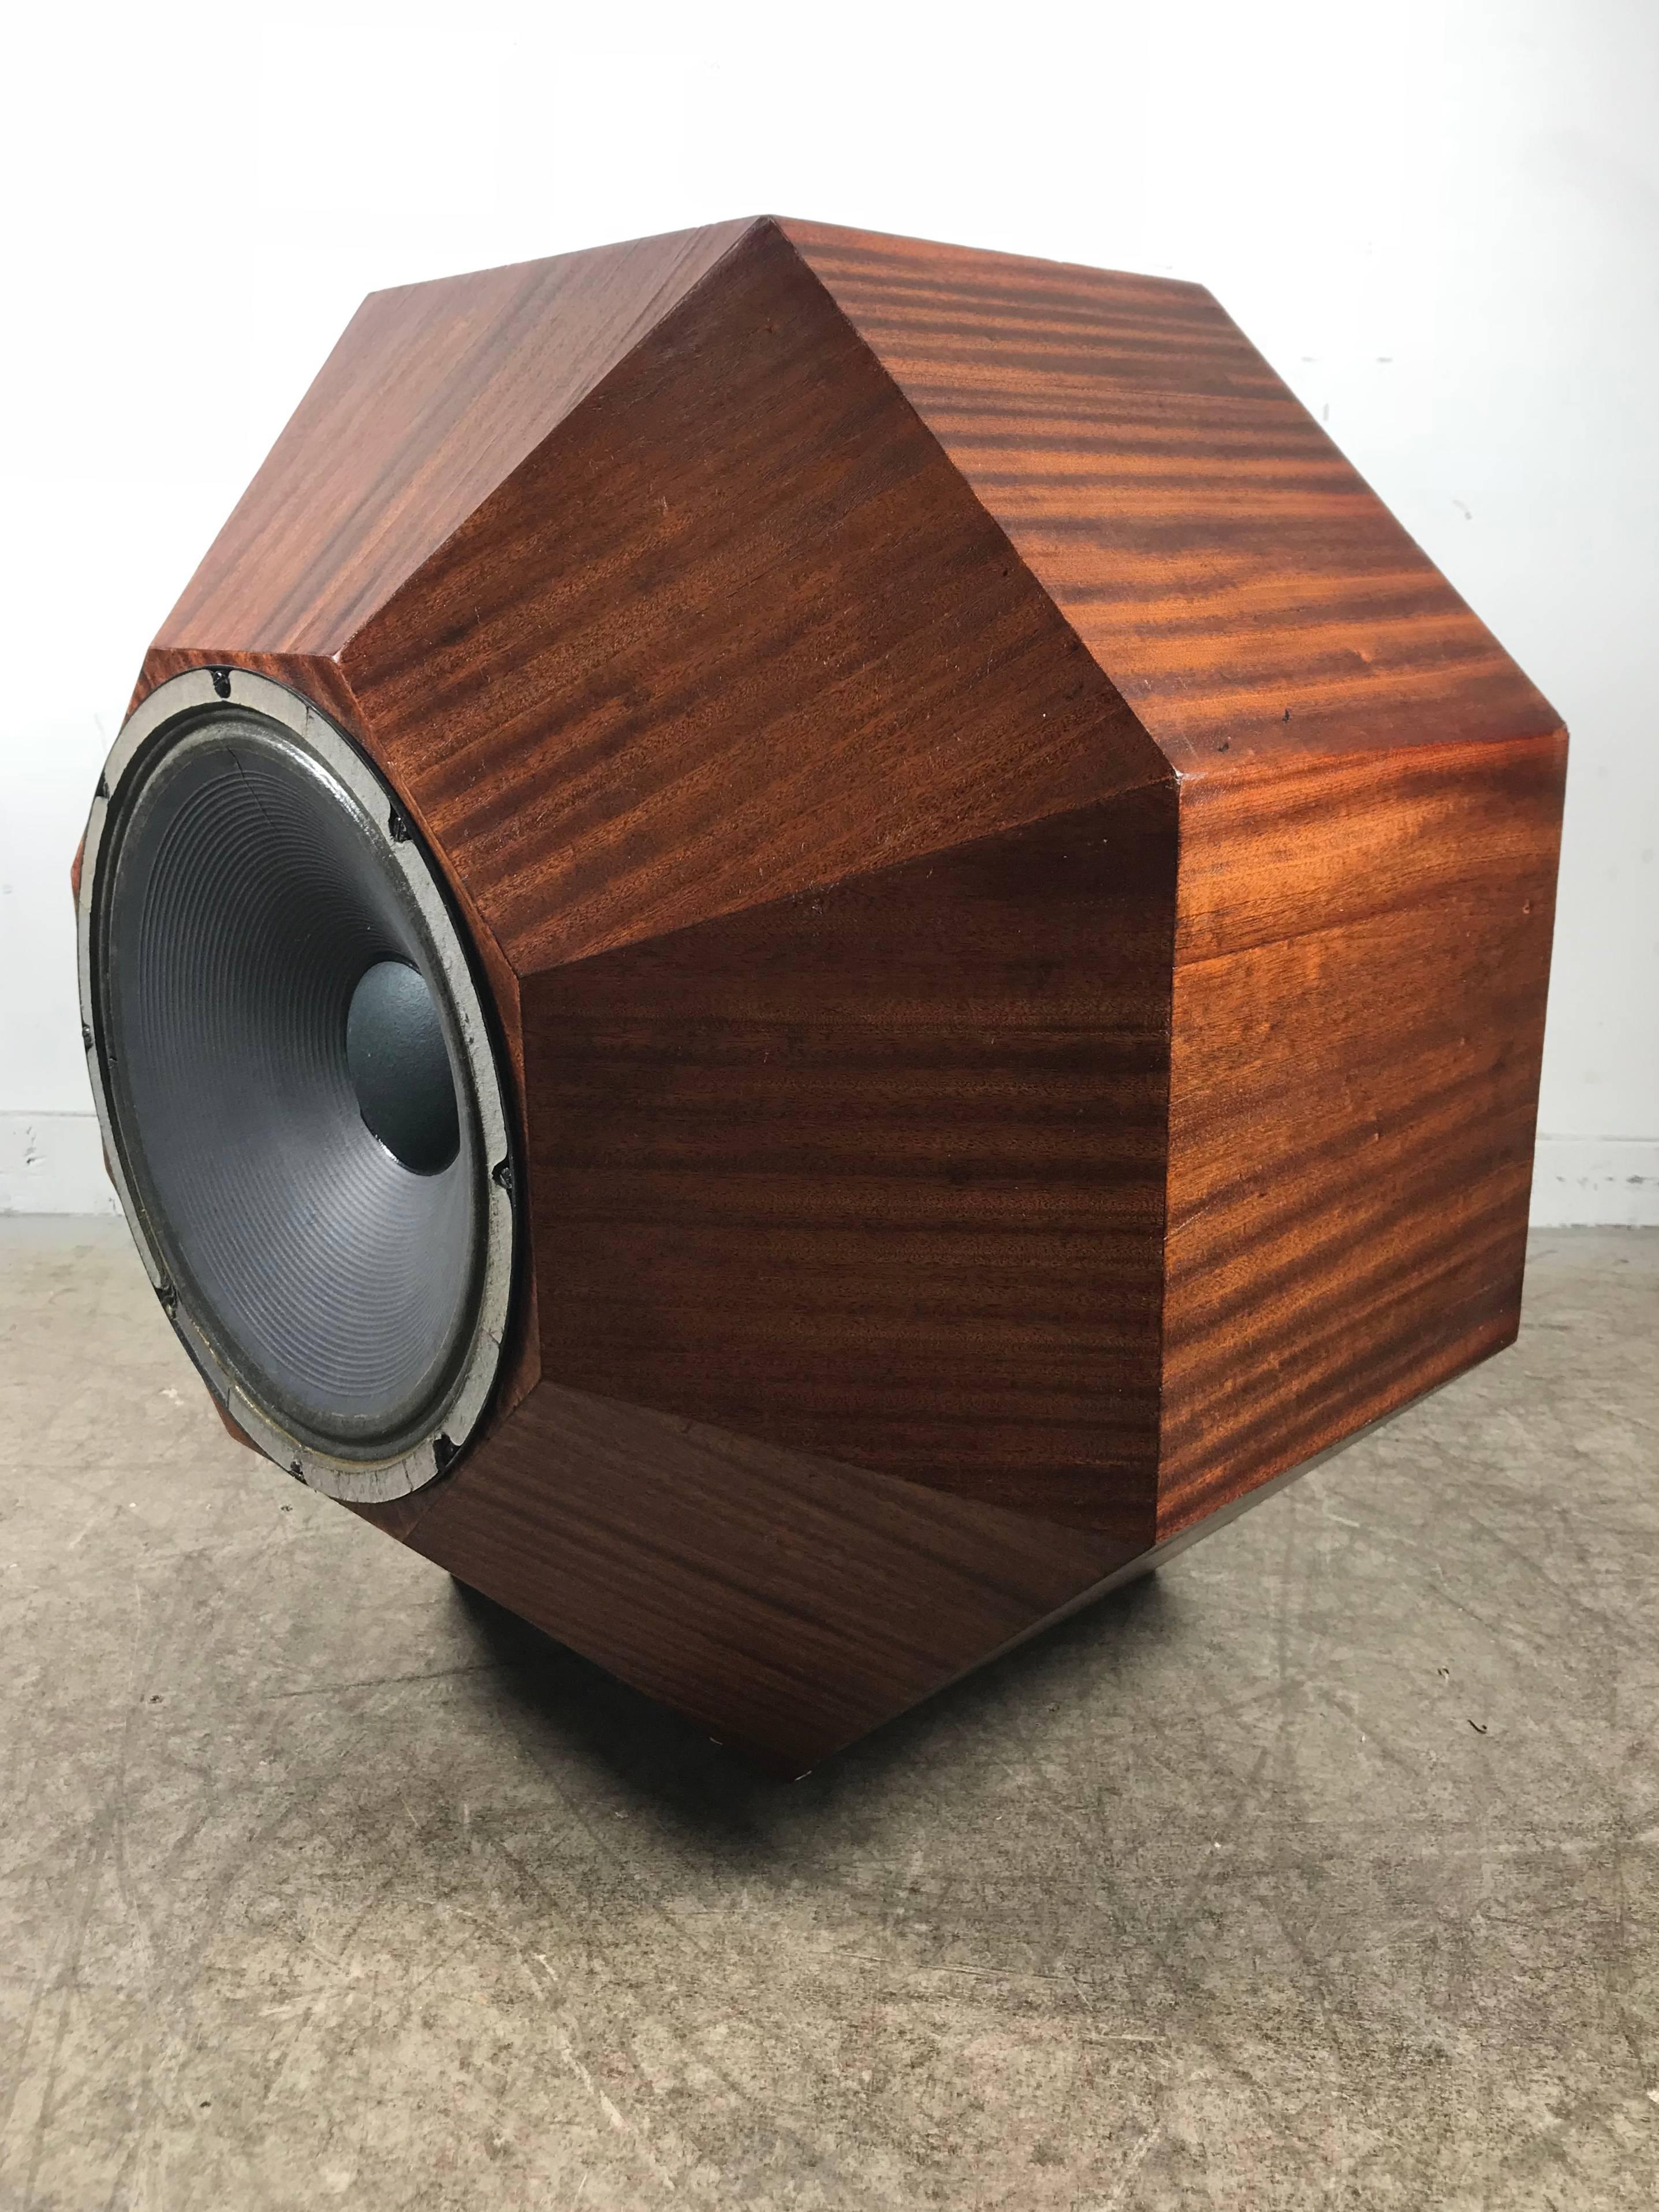 American Unusual Oversized Eight-Sided Ribbon Mahogany Speaker, Space Age Sculpture